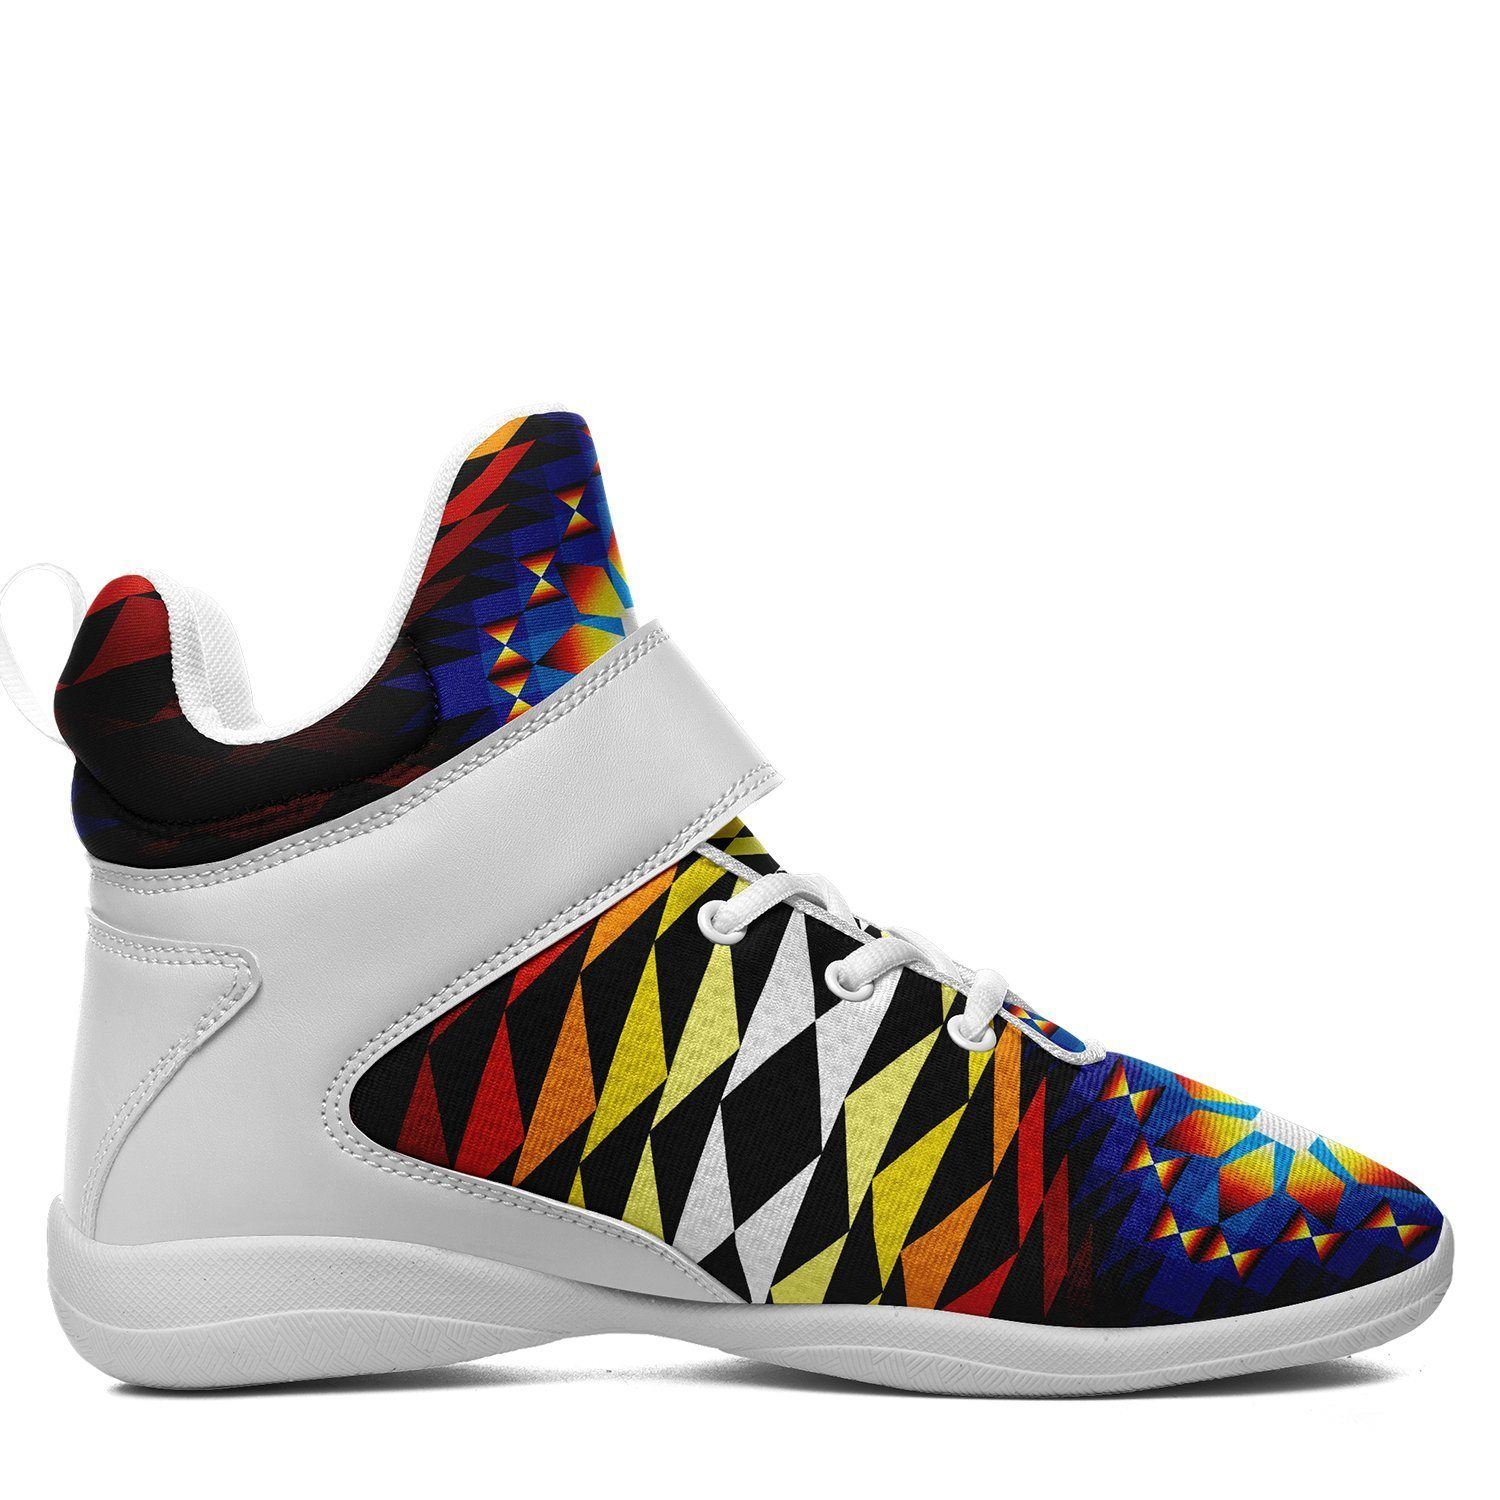 Sunset Blanket Ipottaa Basketball / Sport High Top Shoes - White Sole 49 Dzine 